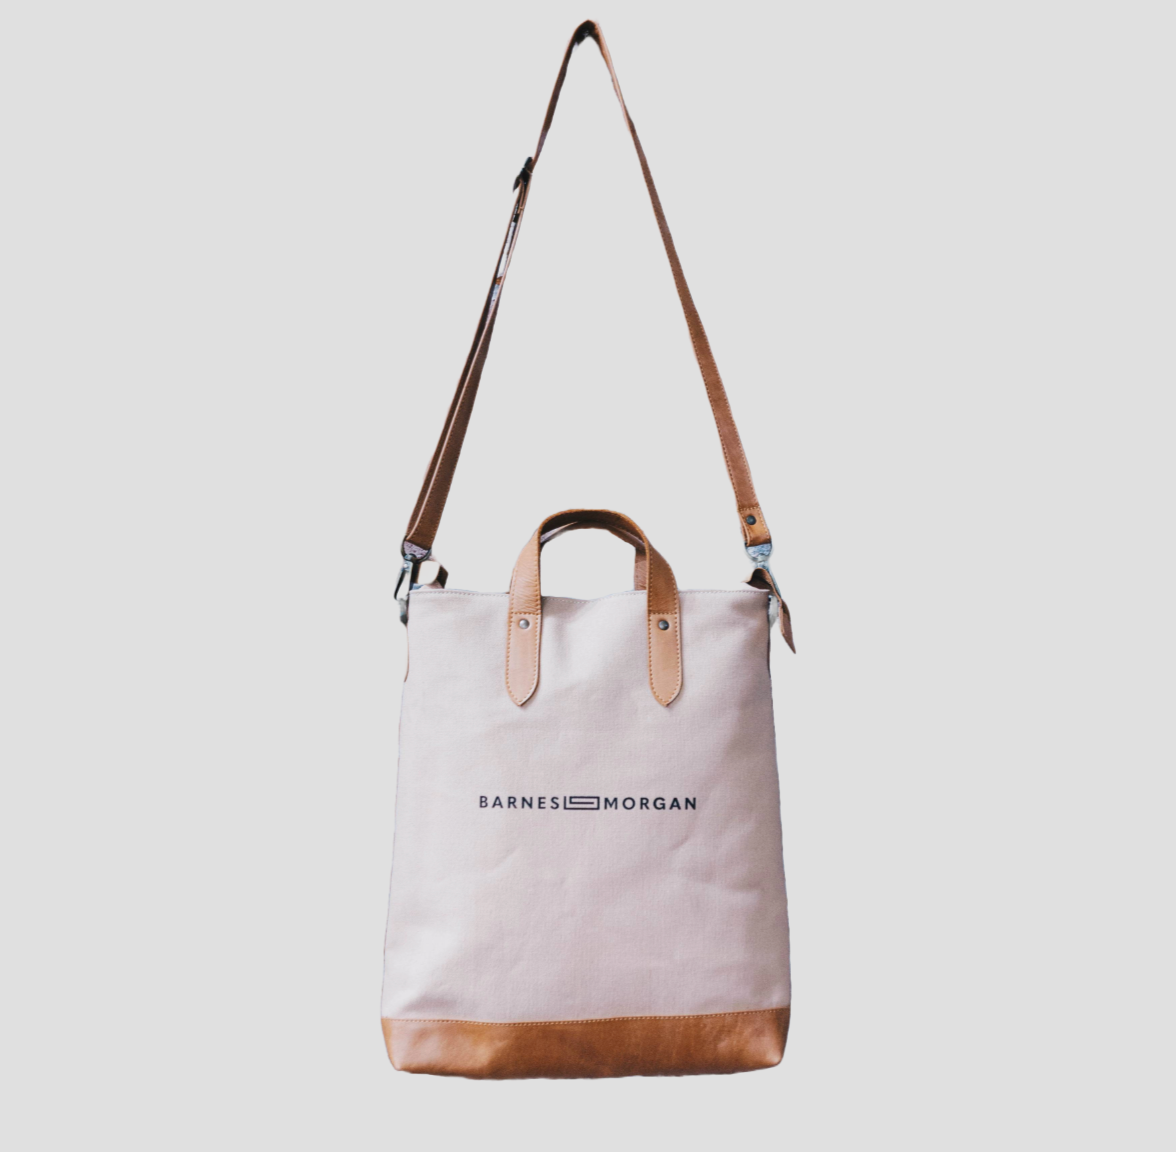 The Old Town Tote - Beige Canvas Cognac Leather